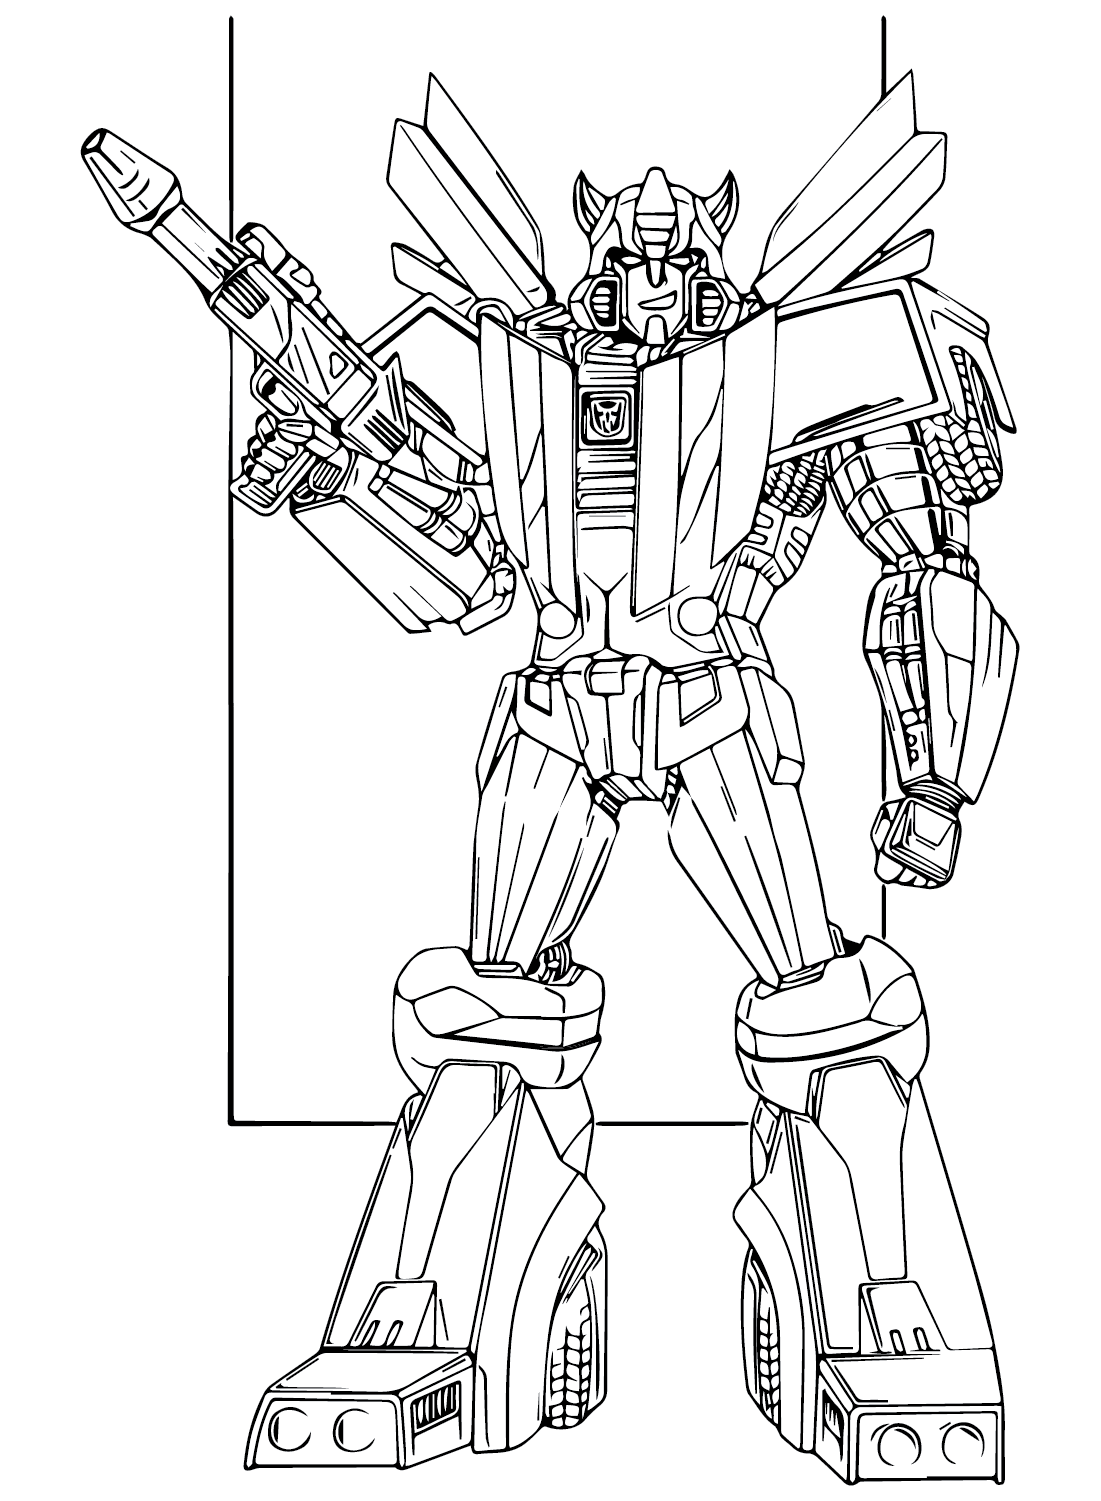 Coloring Pages of Bumblebee